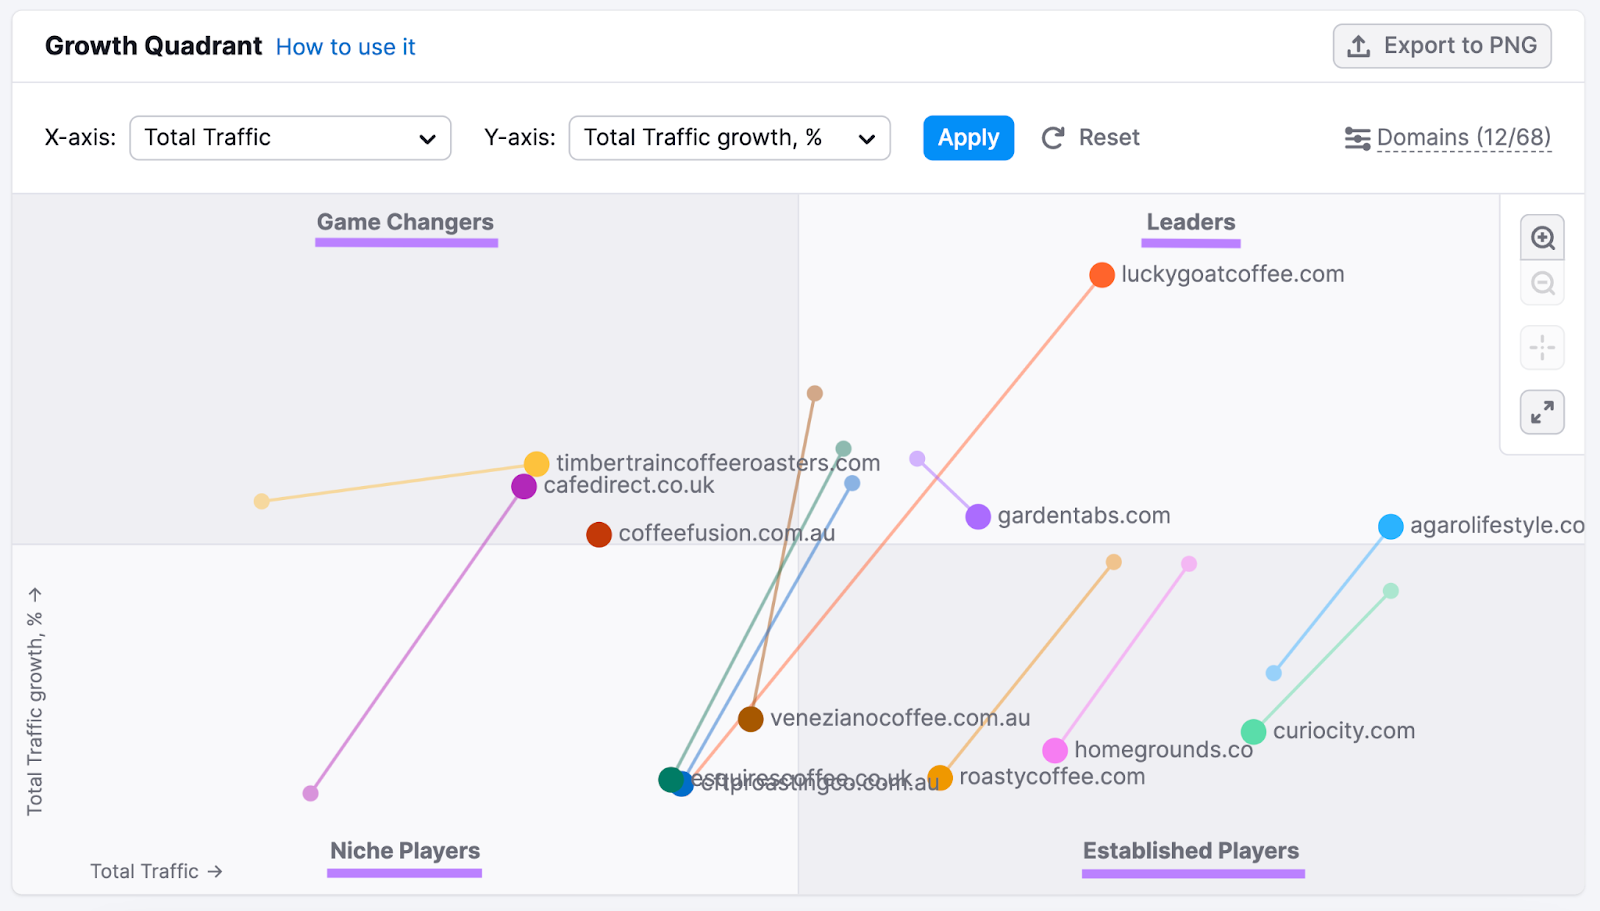 growth quadrant in Market Explorer tool, showing game changers, leaders, niche players, and established players